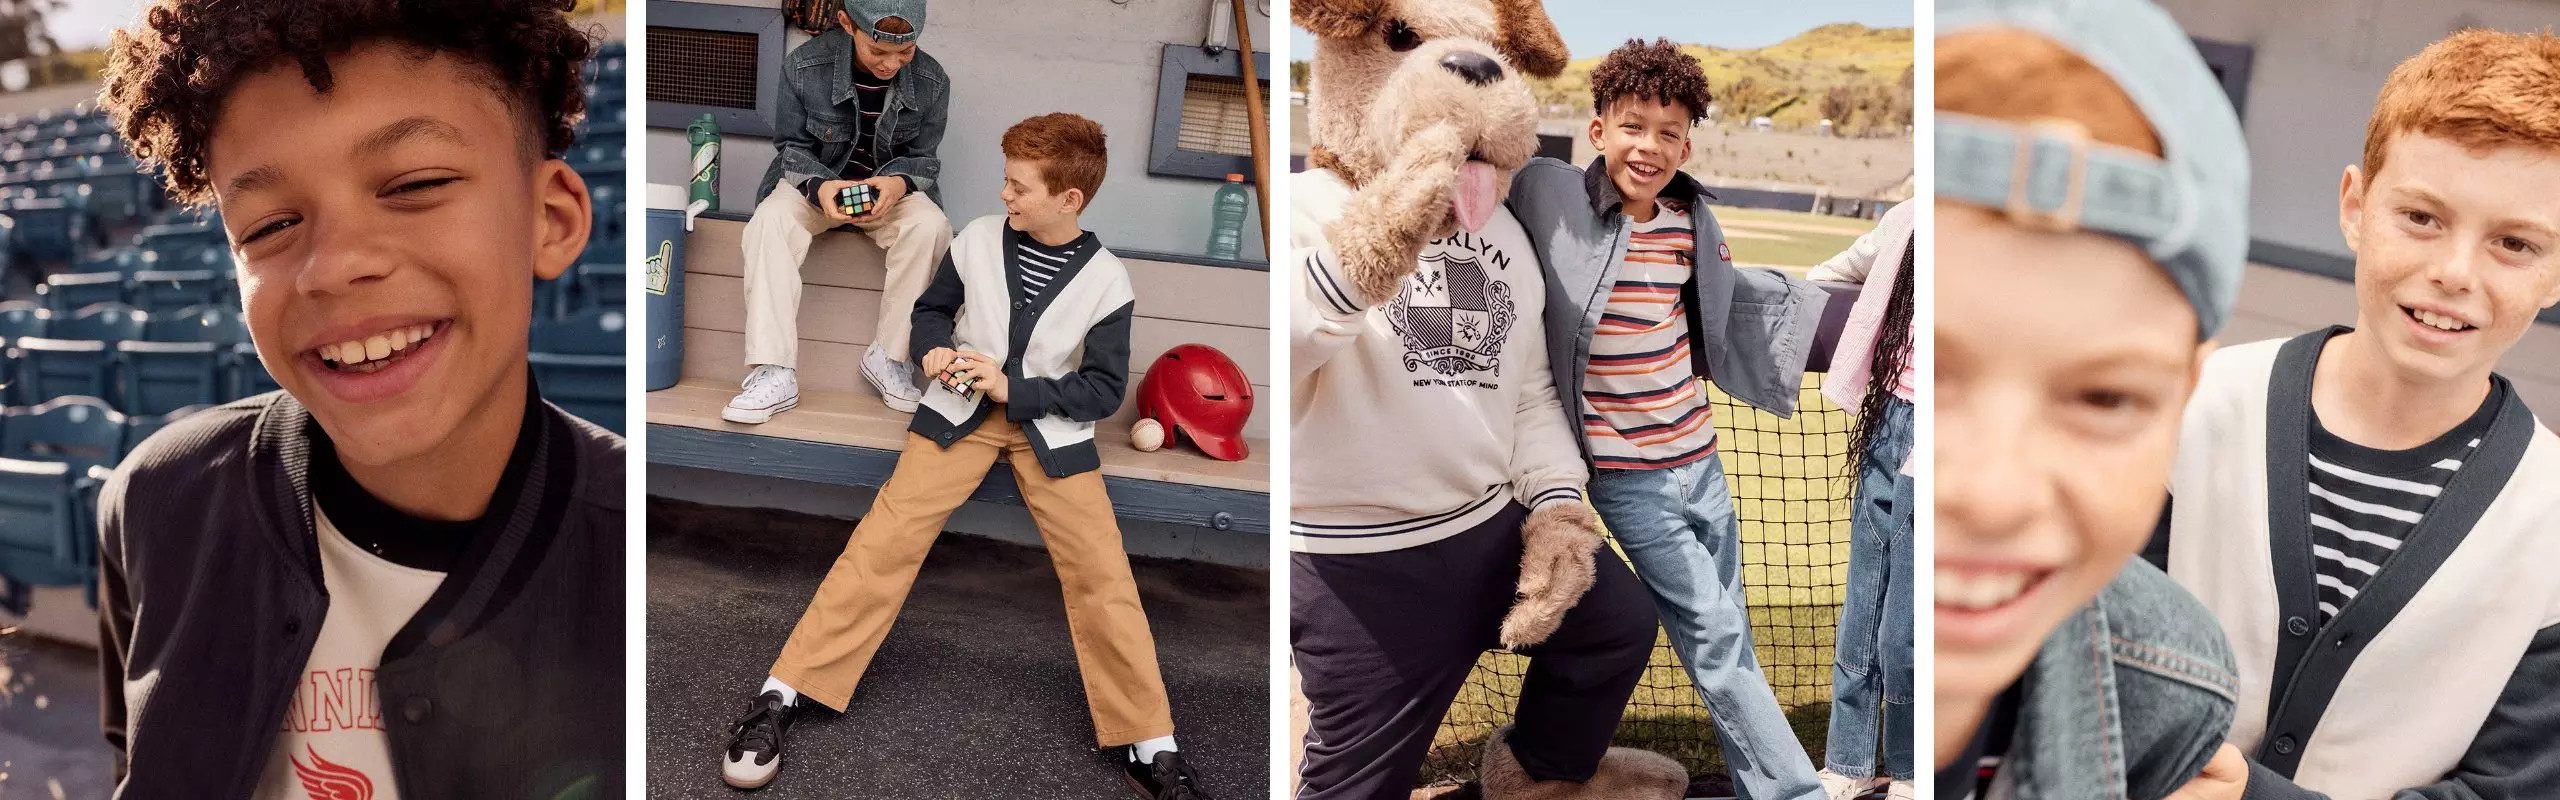 Multiple images of child models wearing back to school attire.